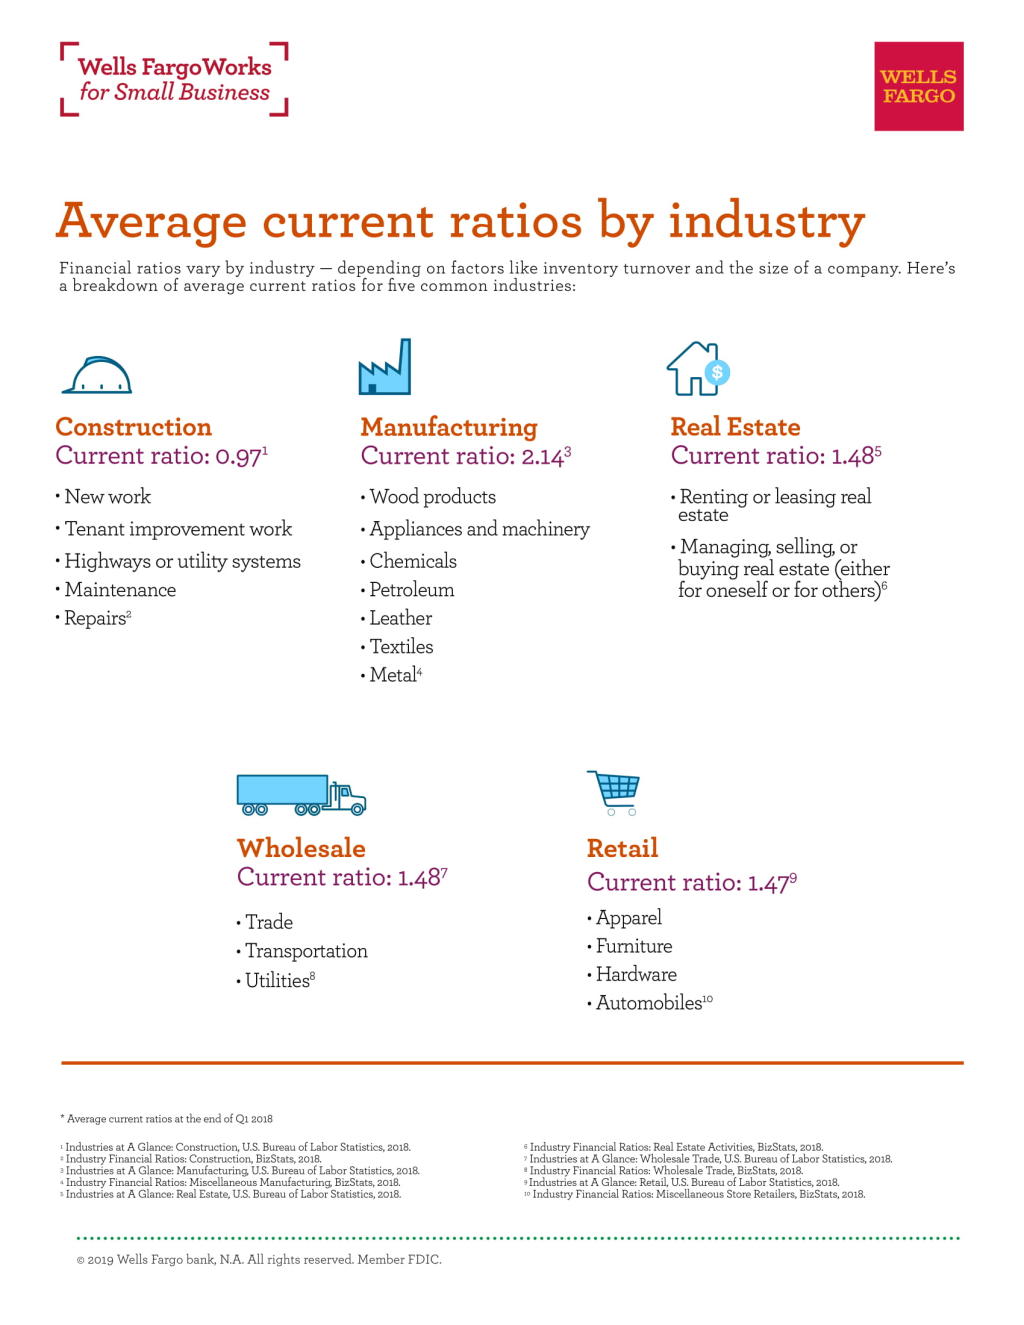 Industry Average and Ratios